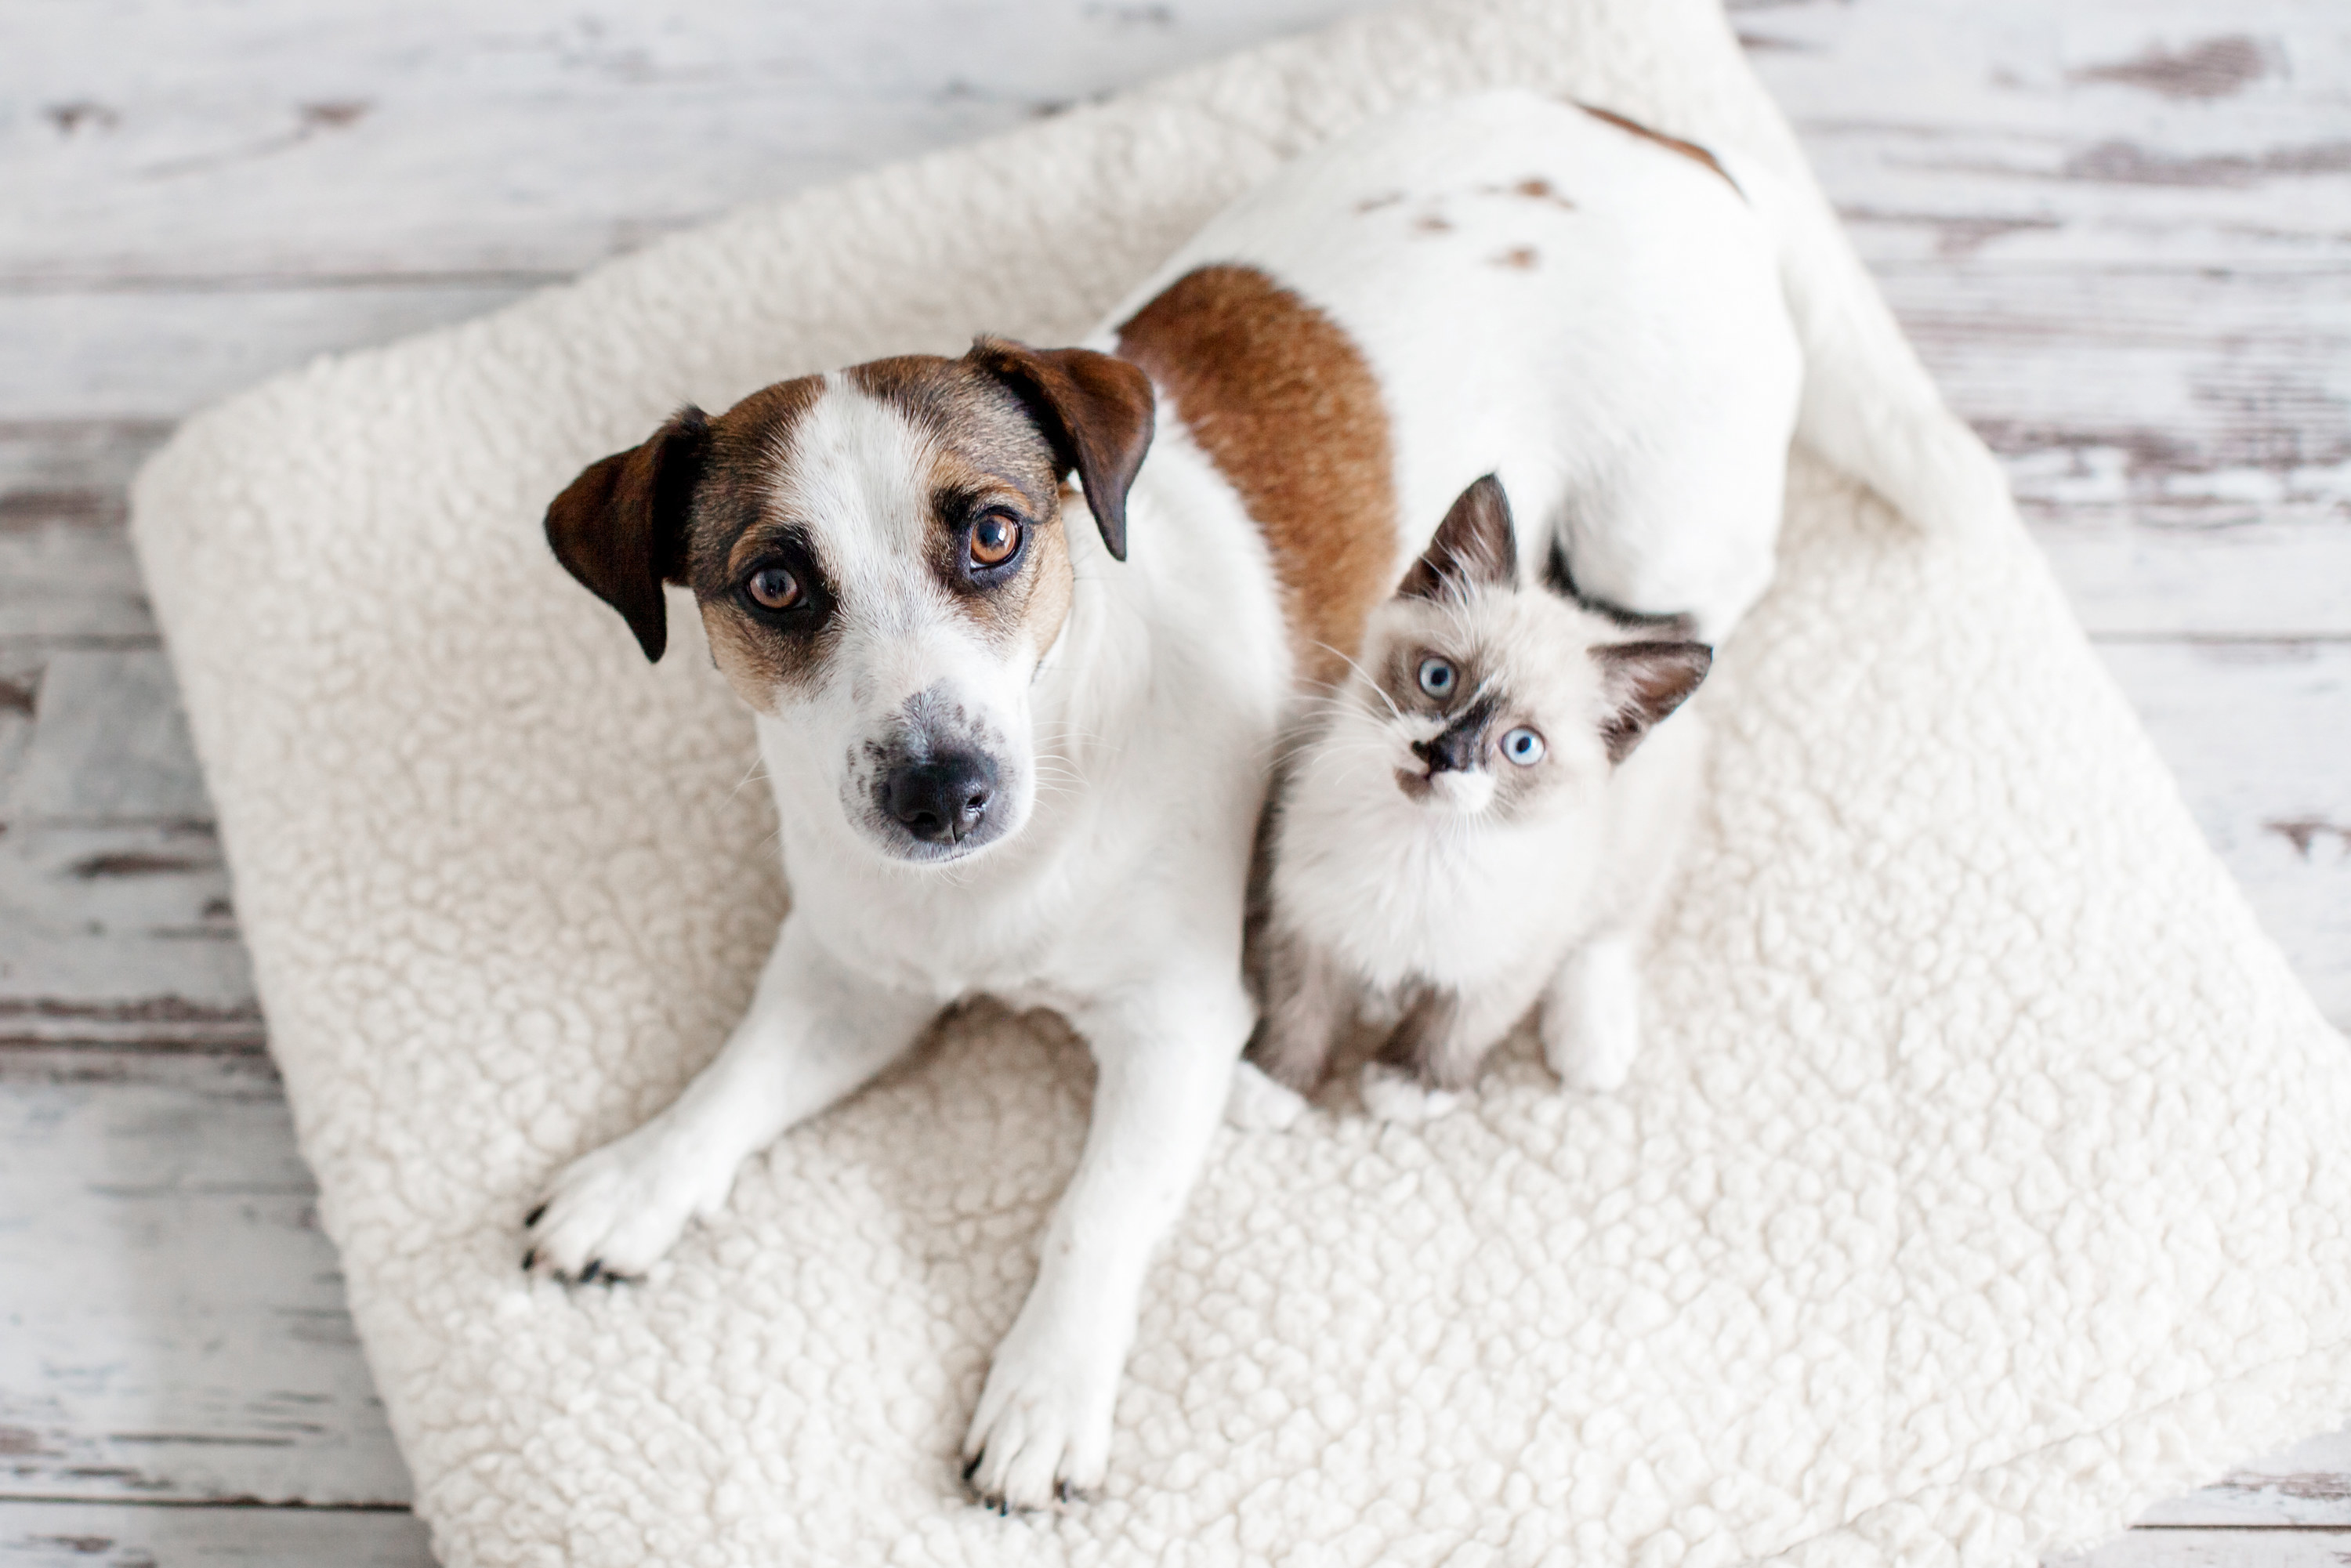 A dog and a cat sitting on a rug and looking up at the camera